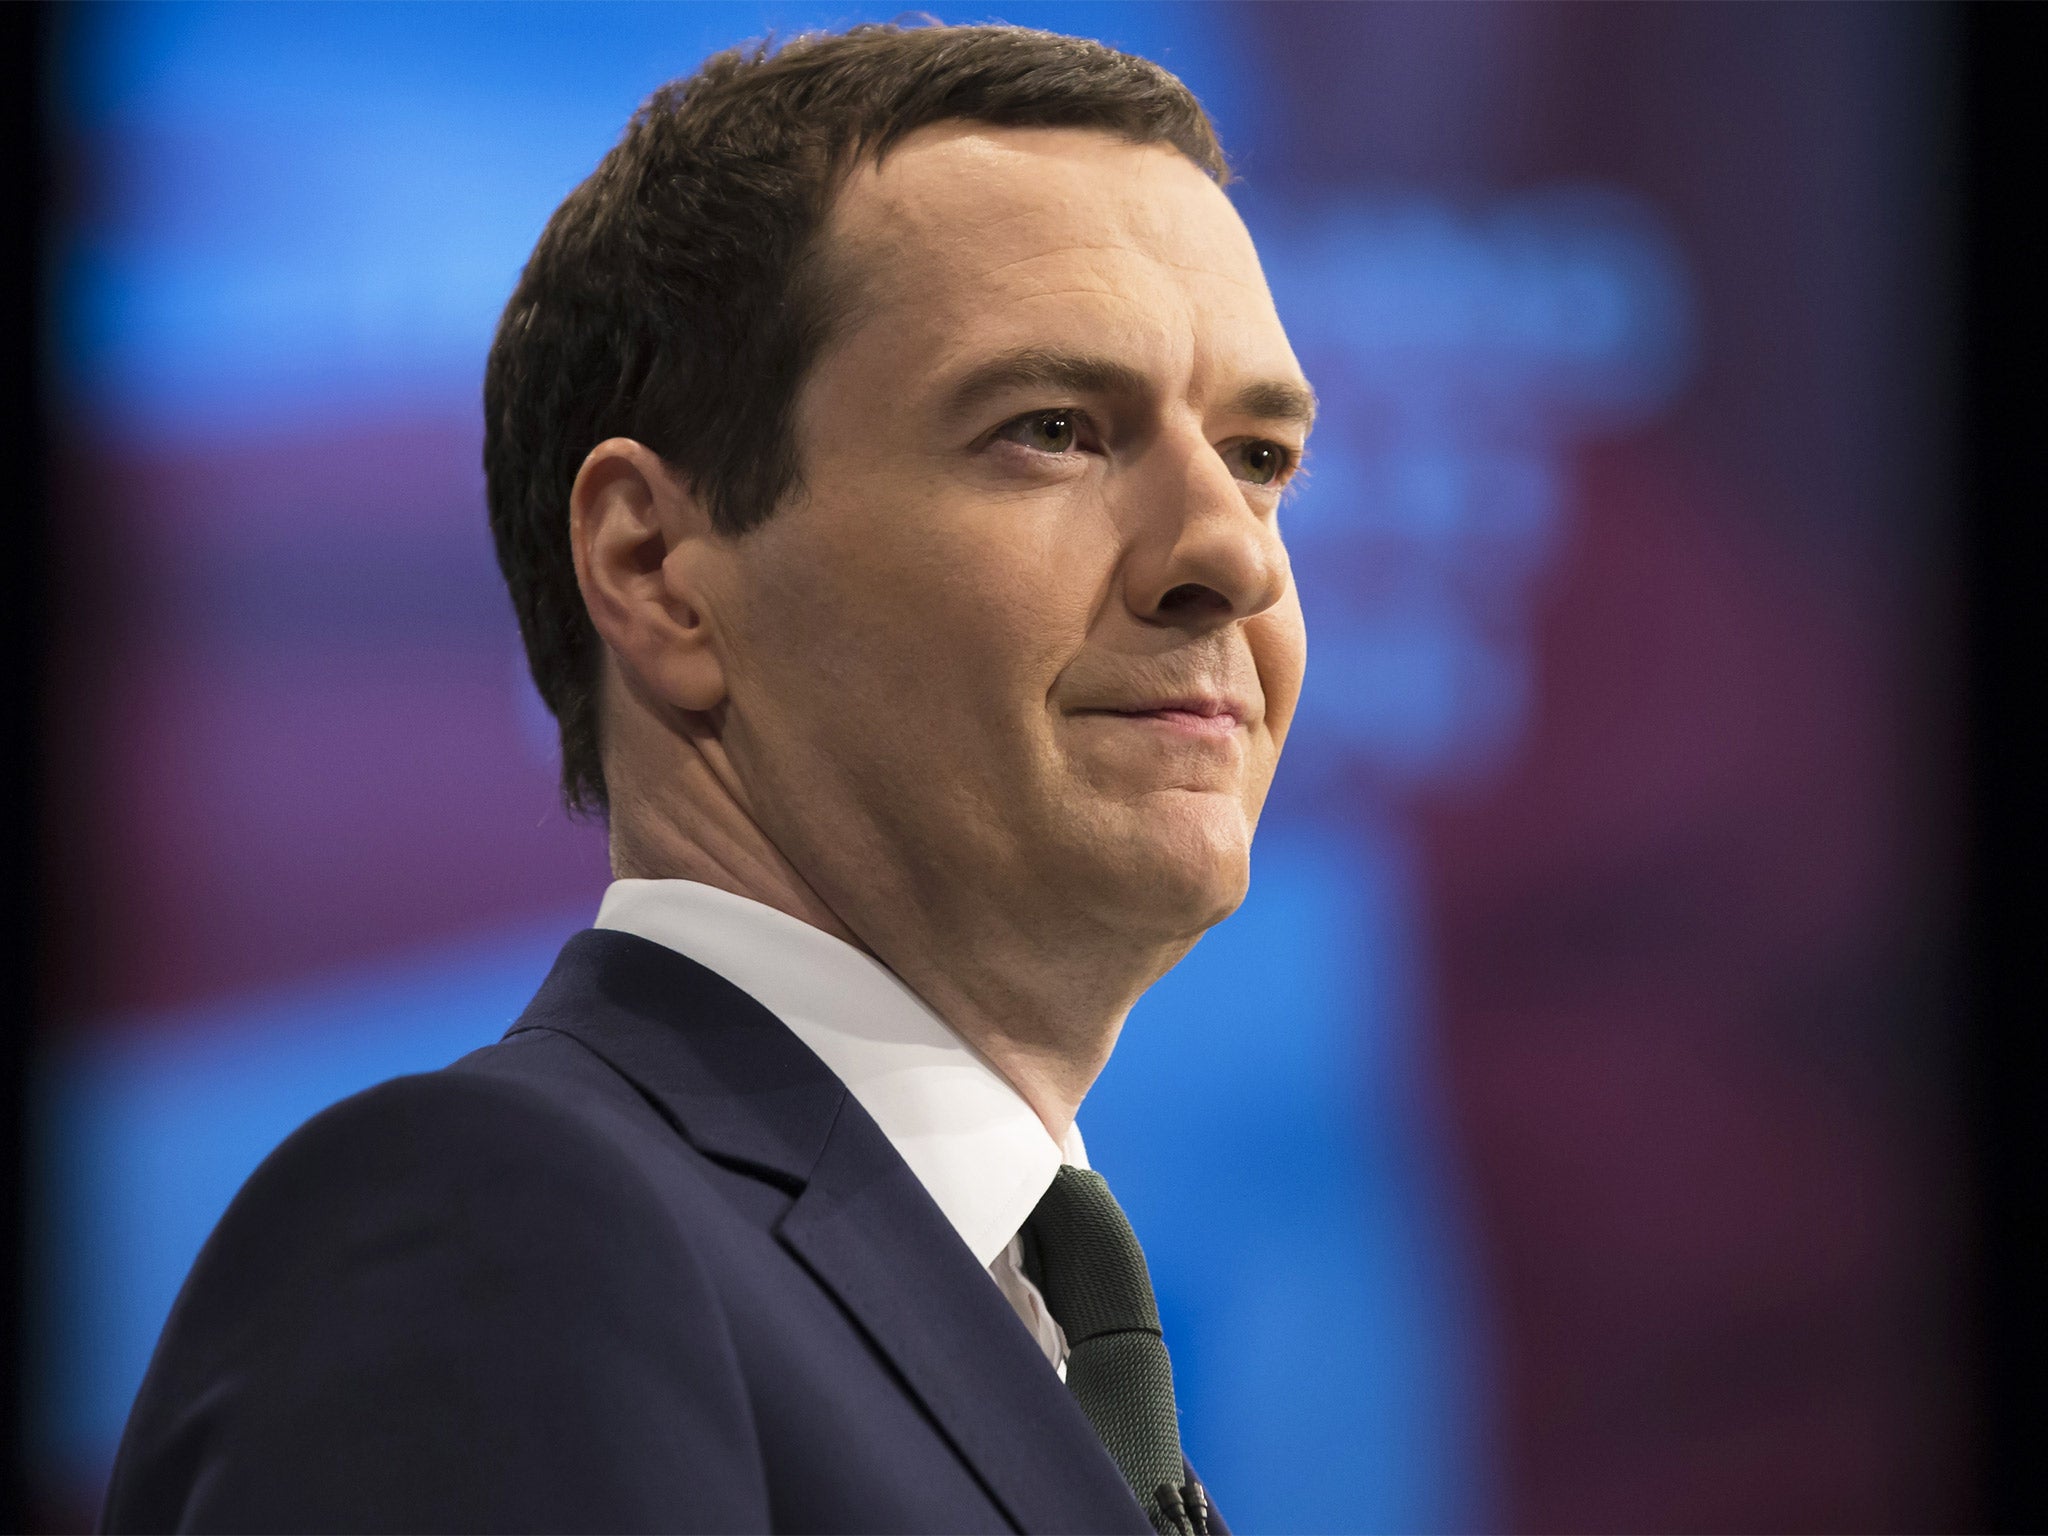 The Chancellor has said his pledge will be funded by putting to good use some of the money paid in fines by banks caught up in the Libor rate-rigging scandal.